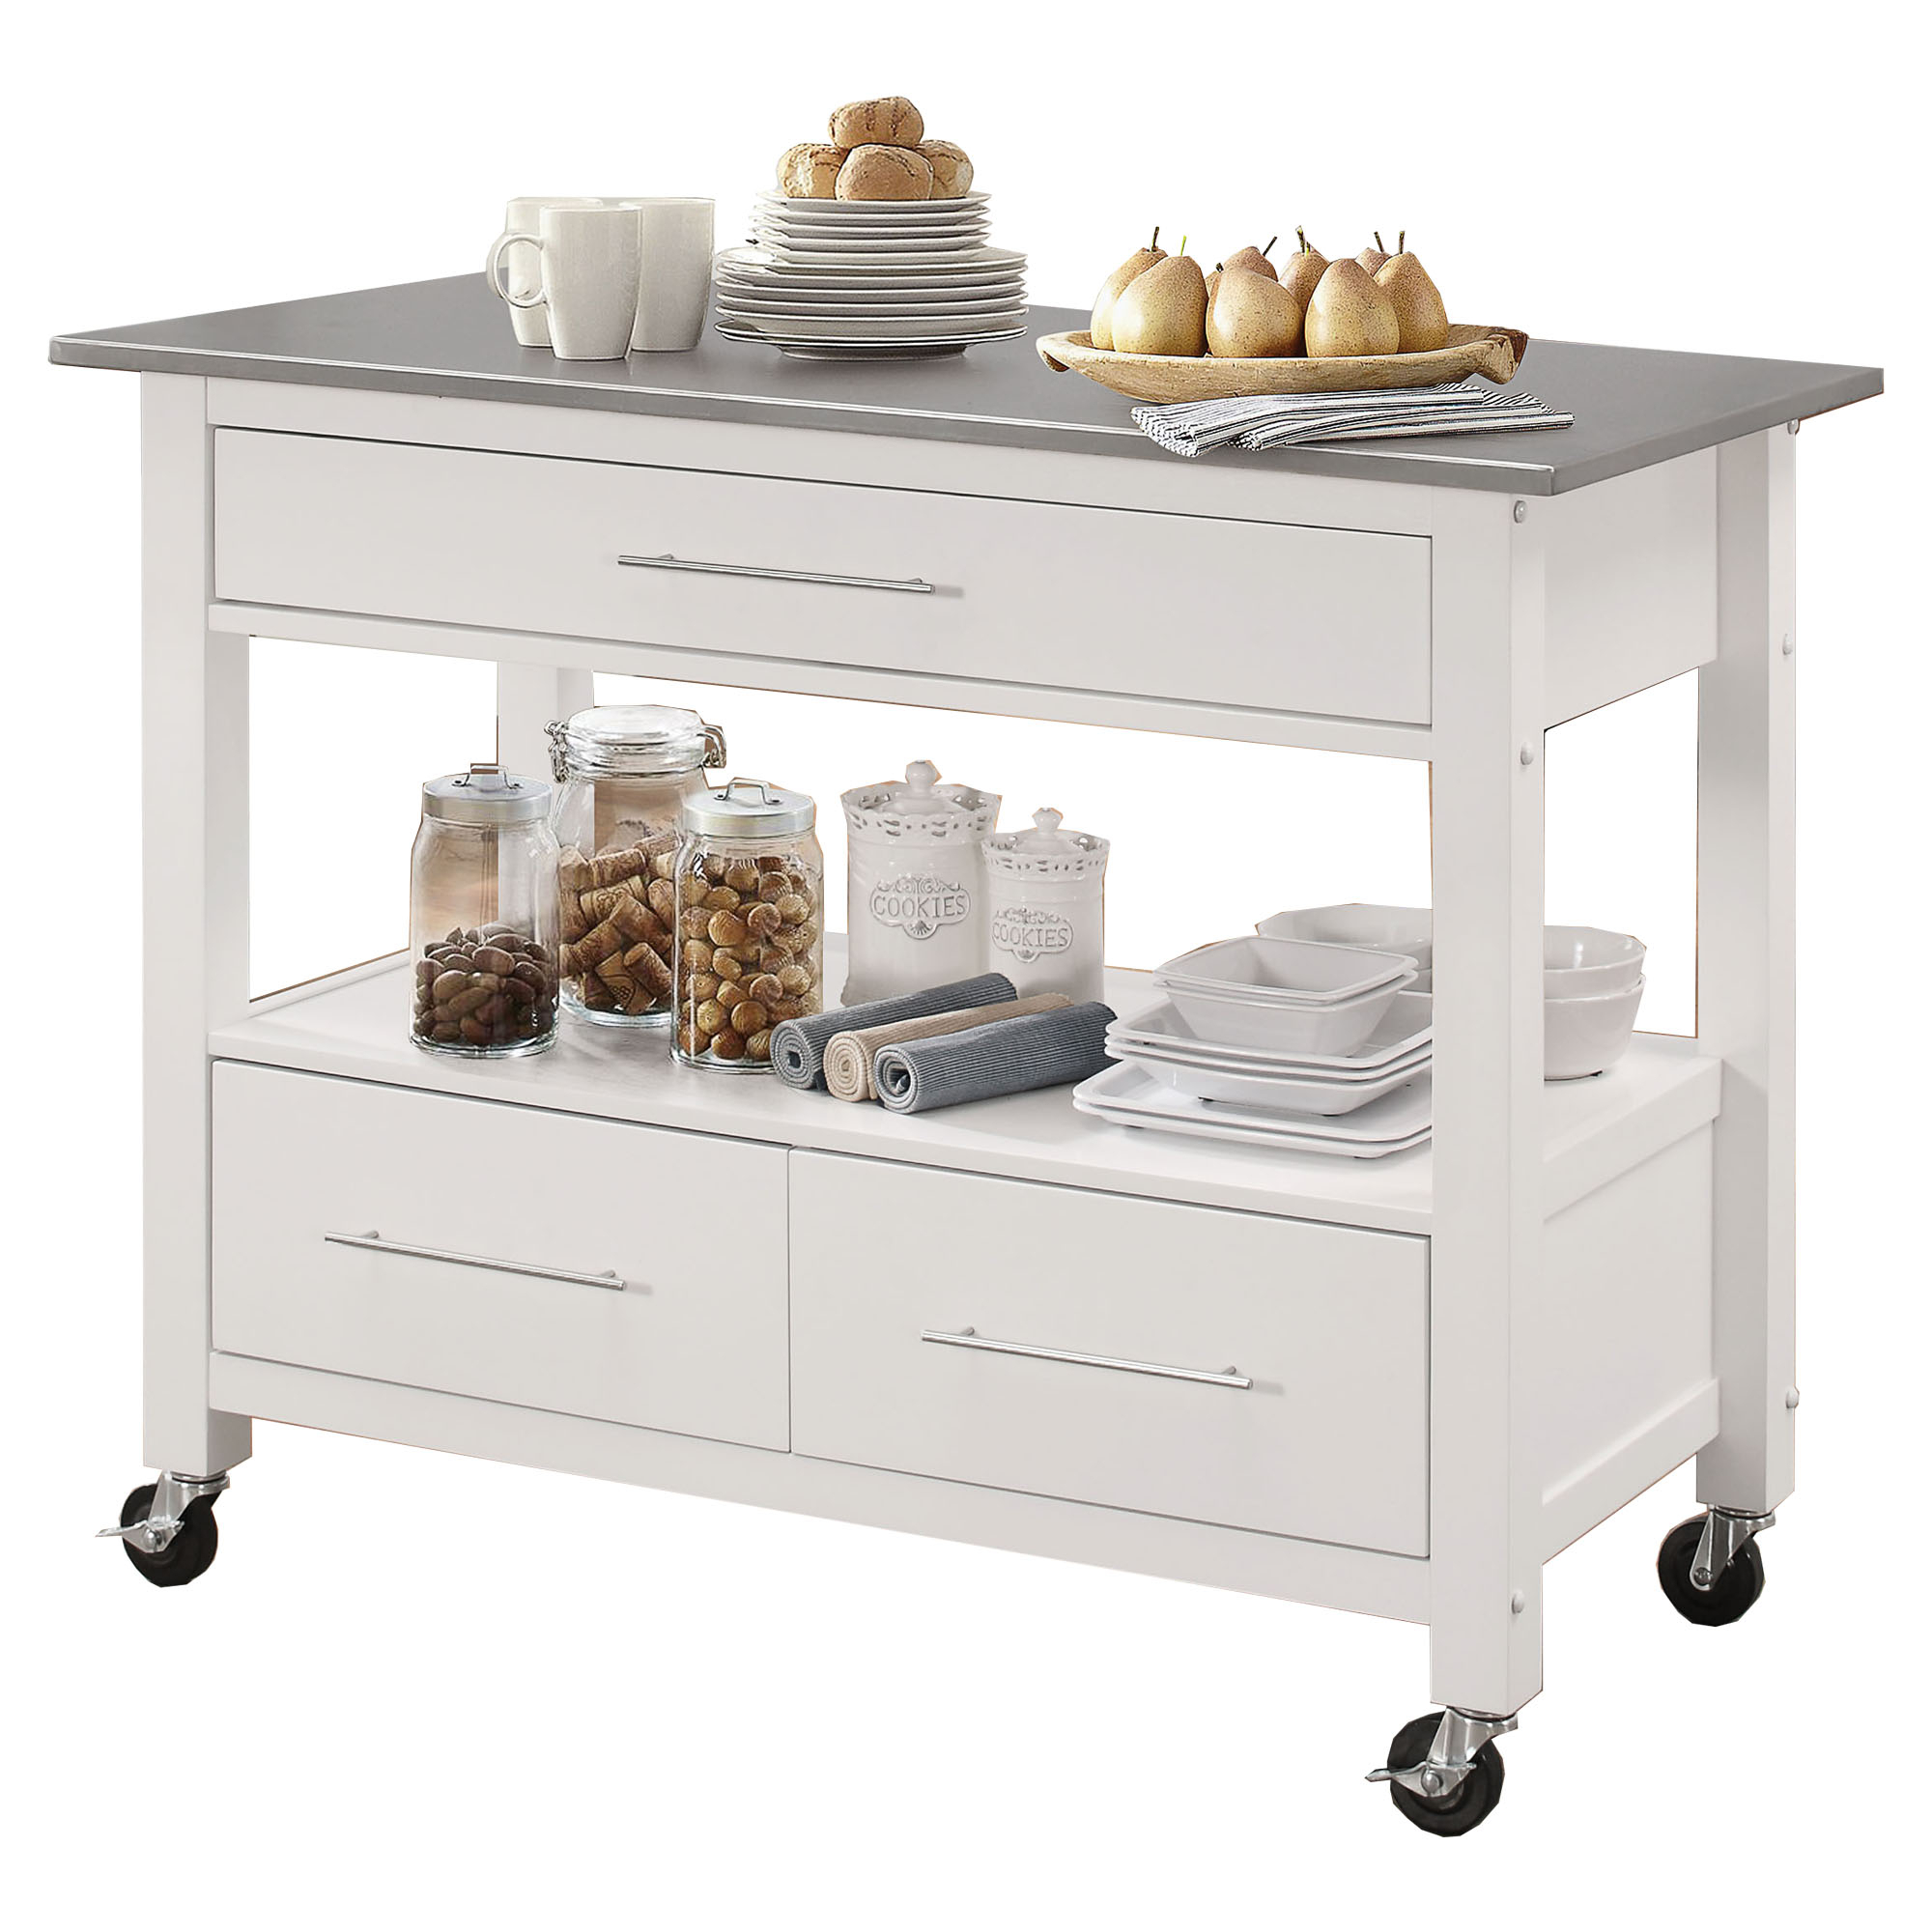 43 Inch Kitchen Cart, 3 Drawers, Open Shelf, Stainless Steel Top, White